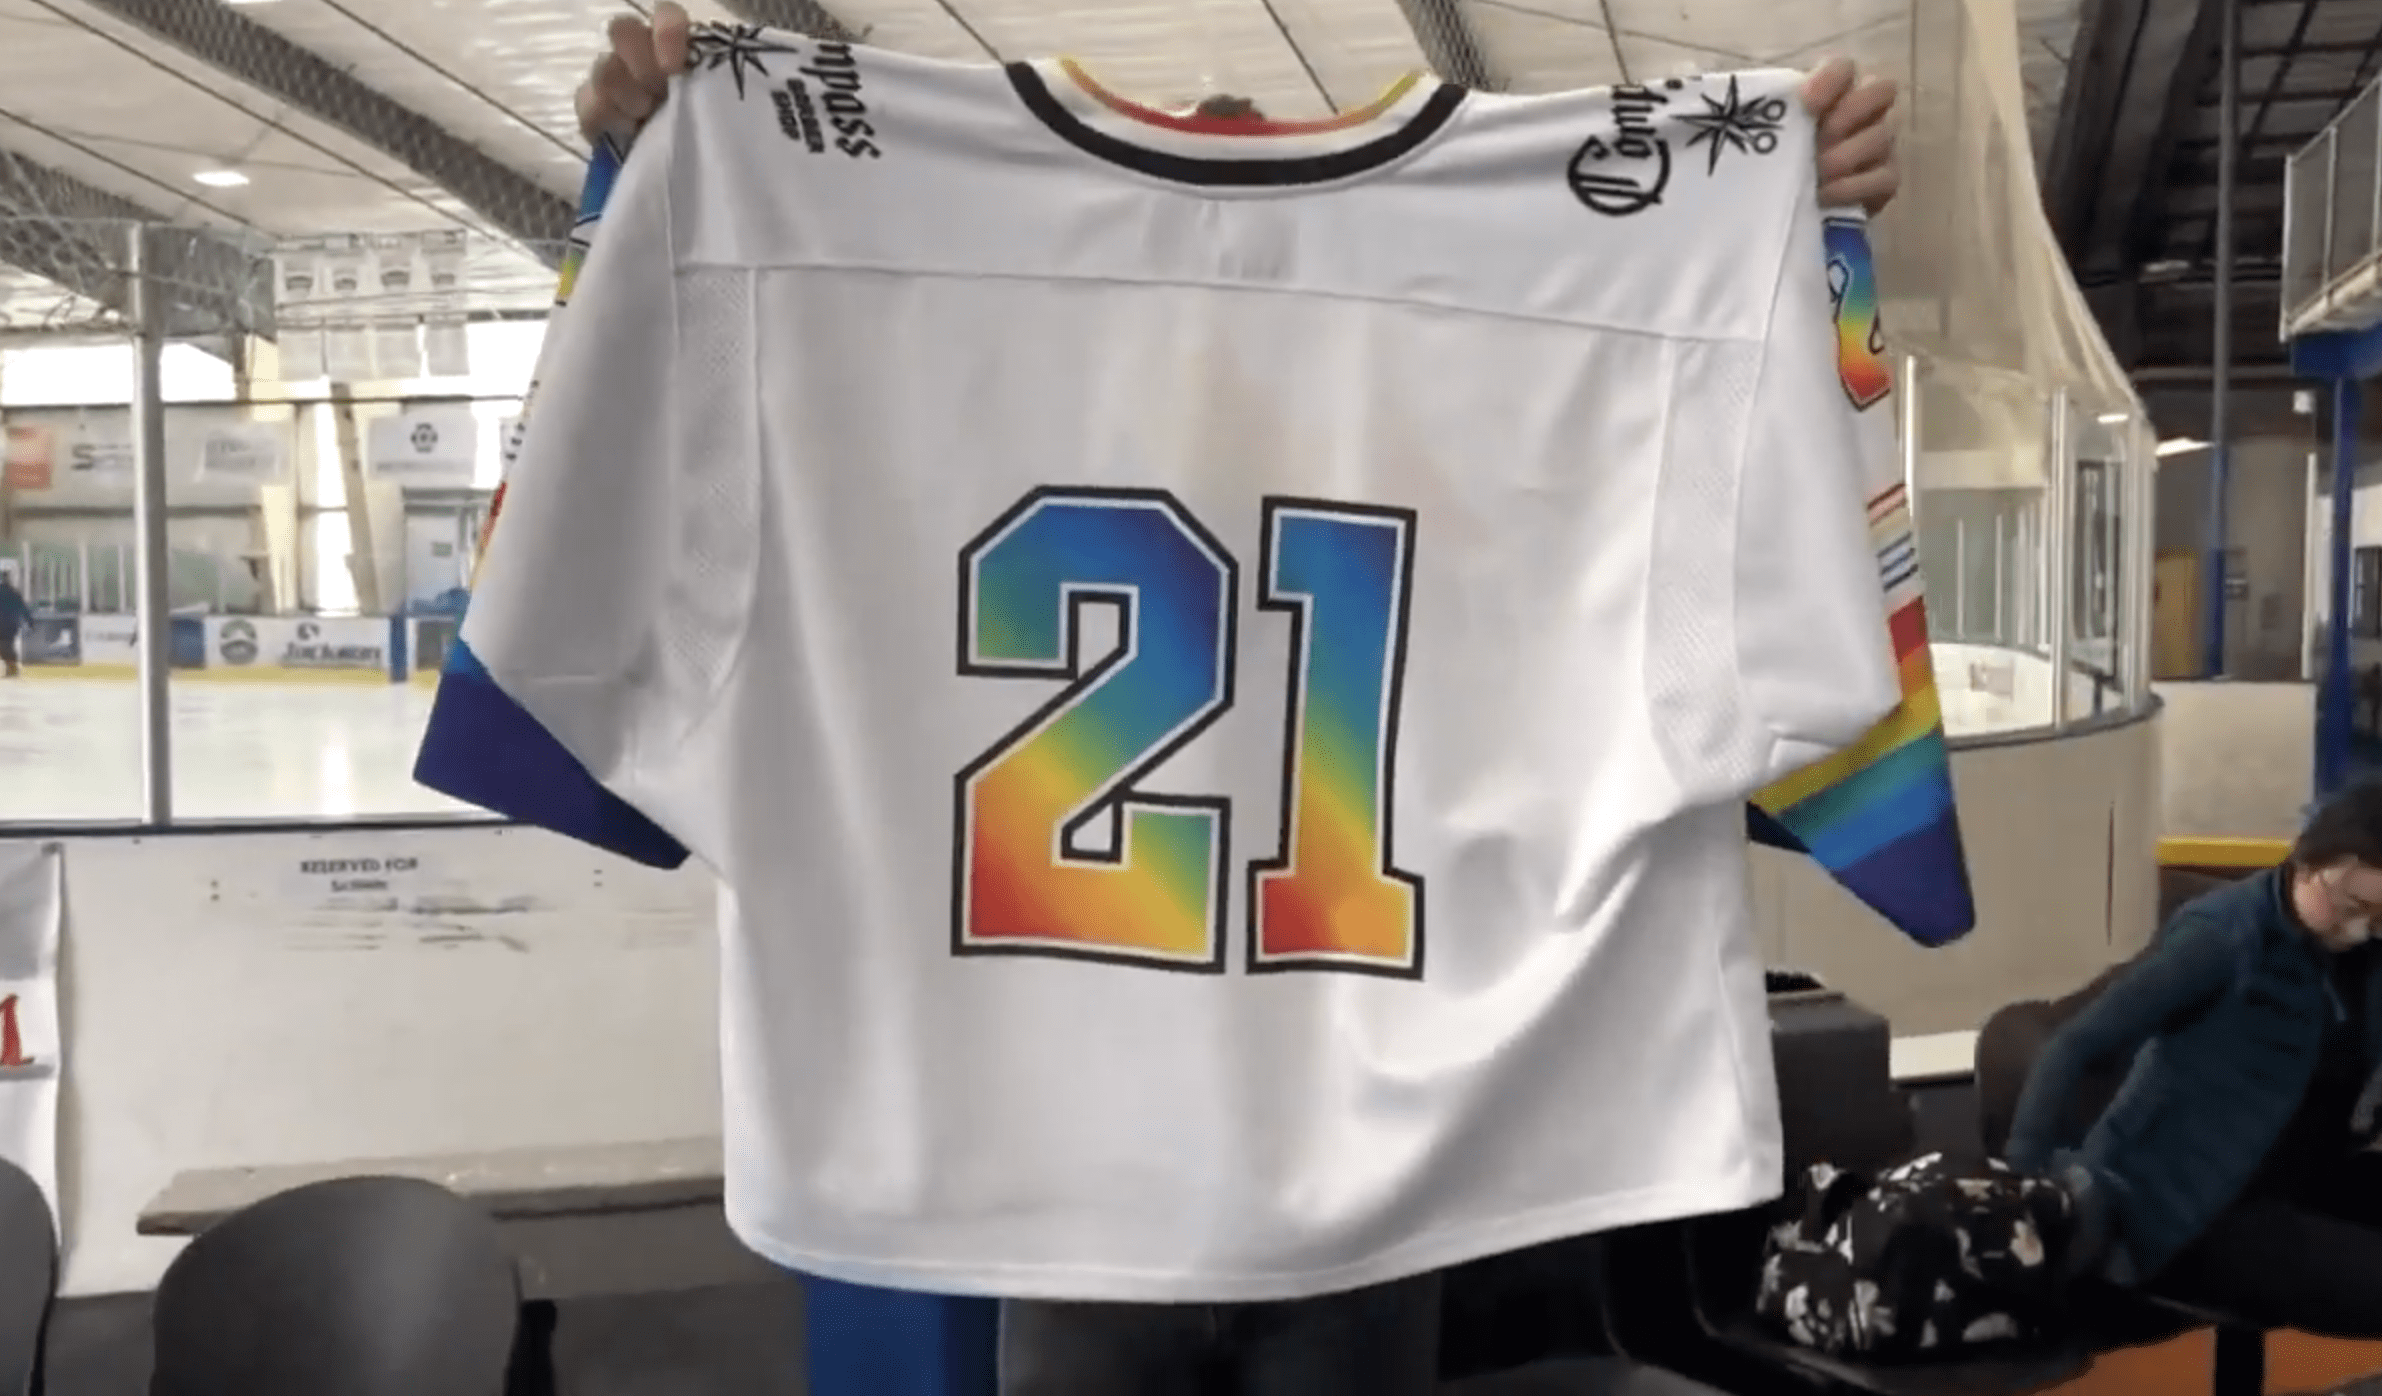 Orthodox hockey player stands by his faith, refuses to wear LGBTQ